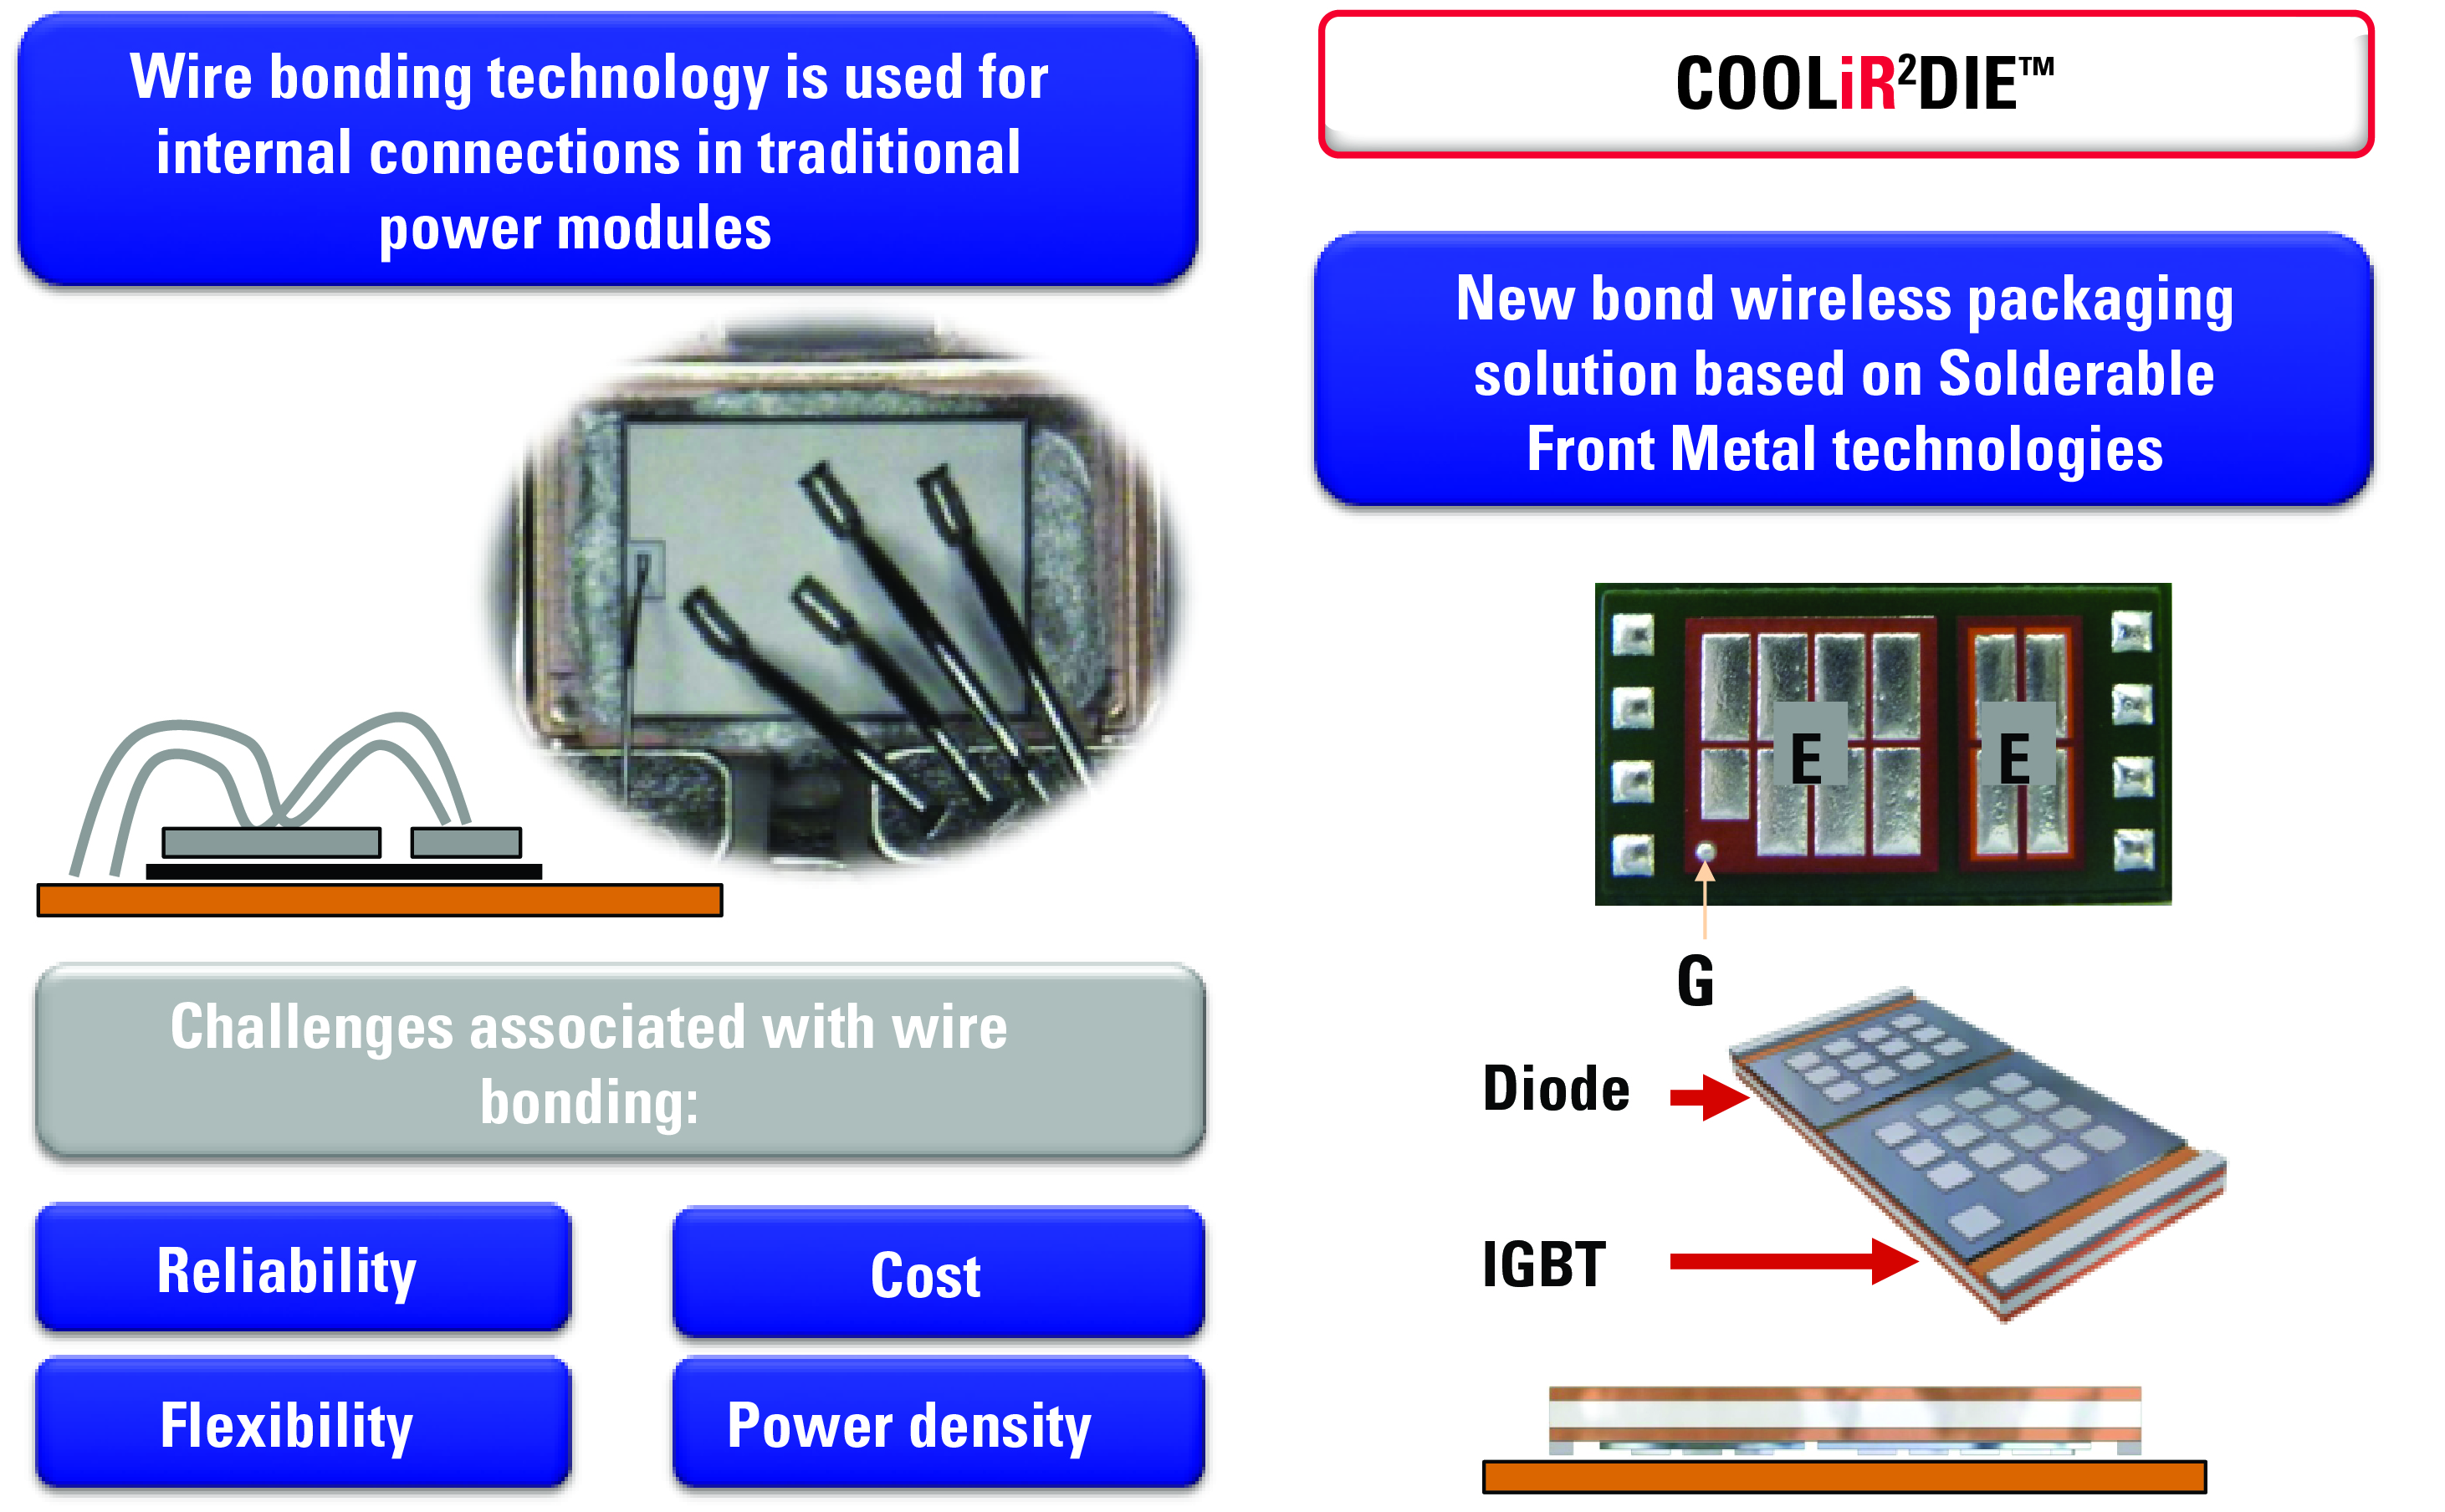 Figure 1: Comparison of traditional wire bonding and the new CooliR²DIE